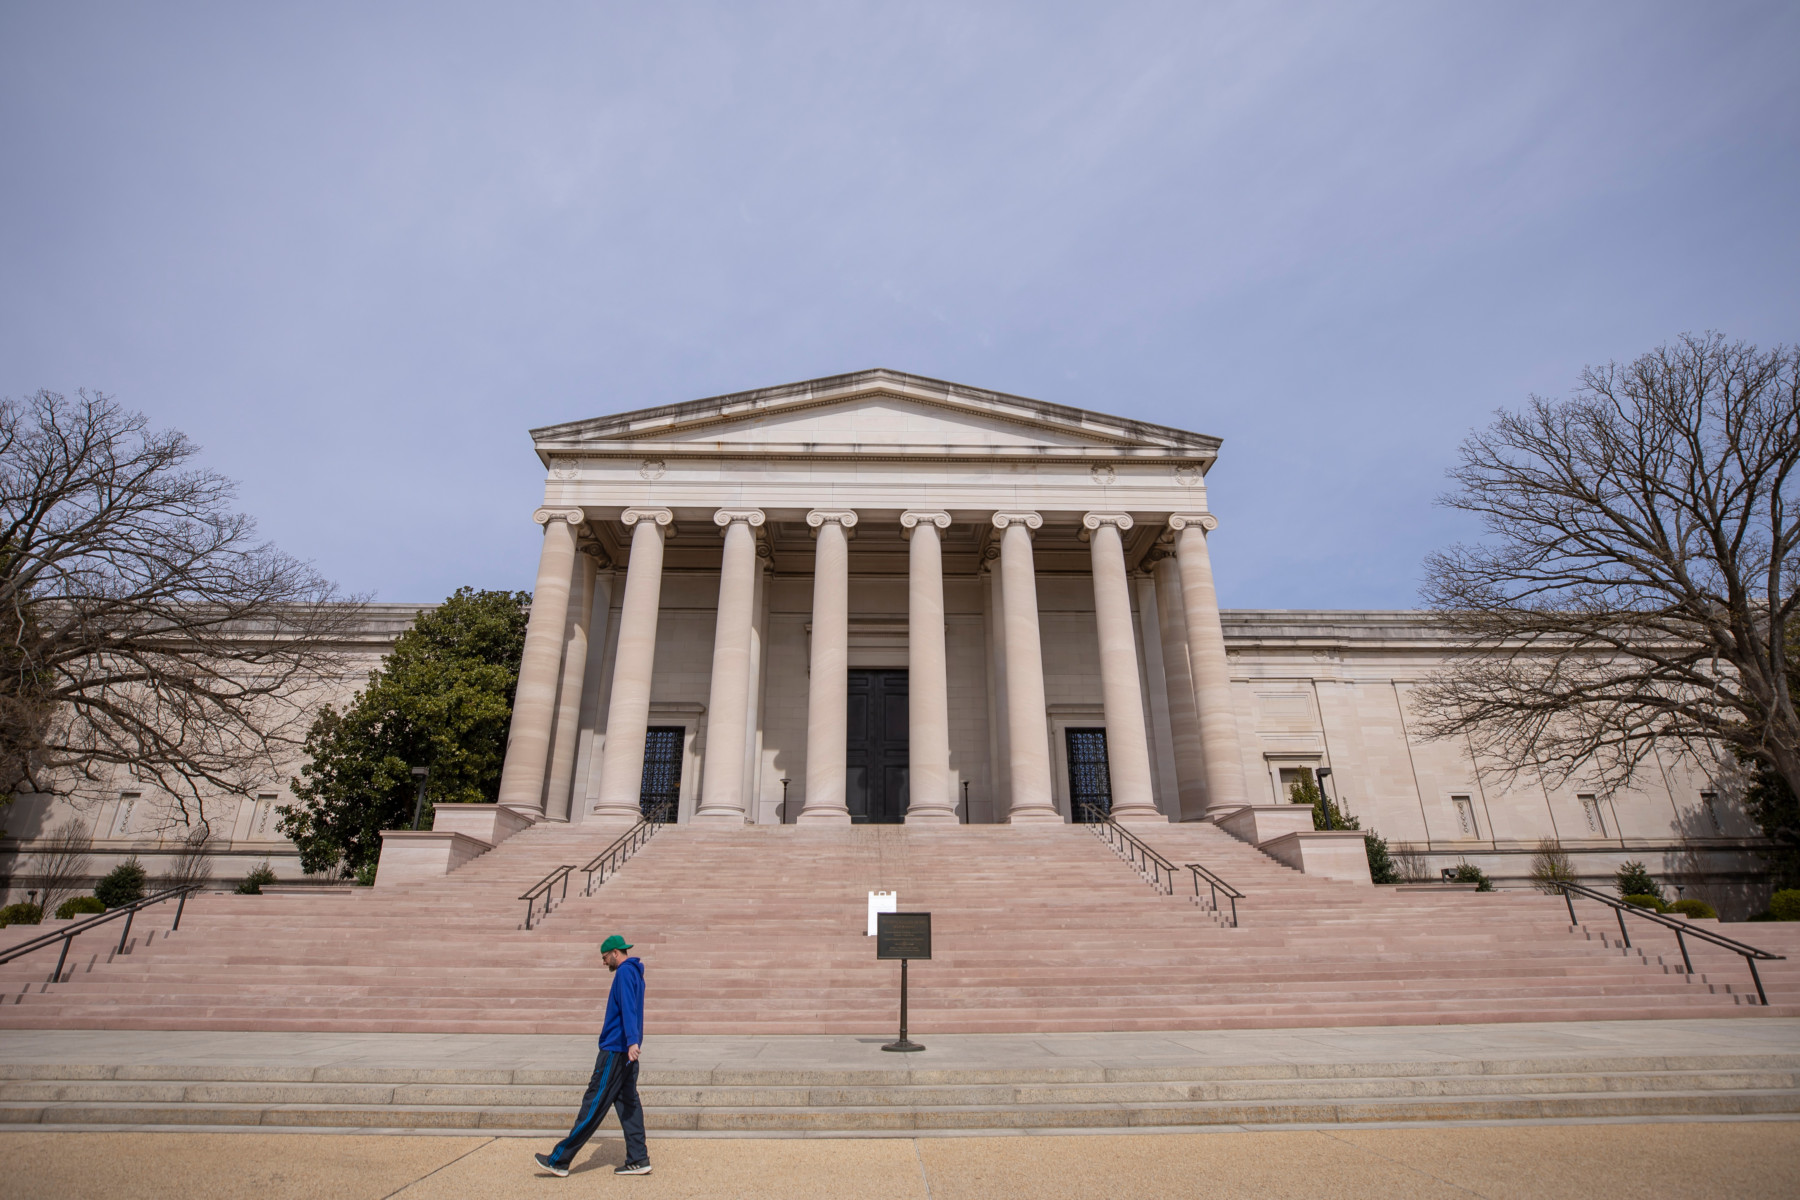 The steps of the National Gallery of Art and other sites in the The U.S. Capitol are closed 